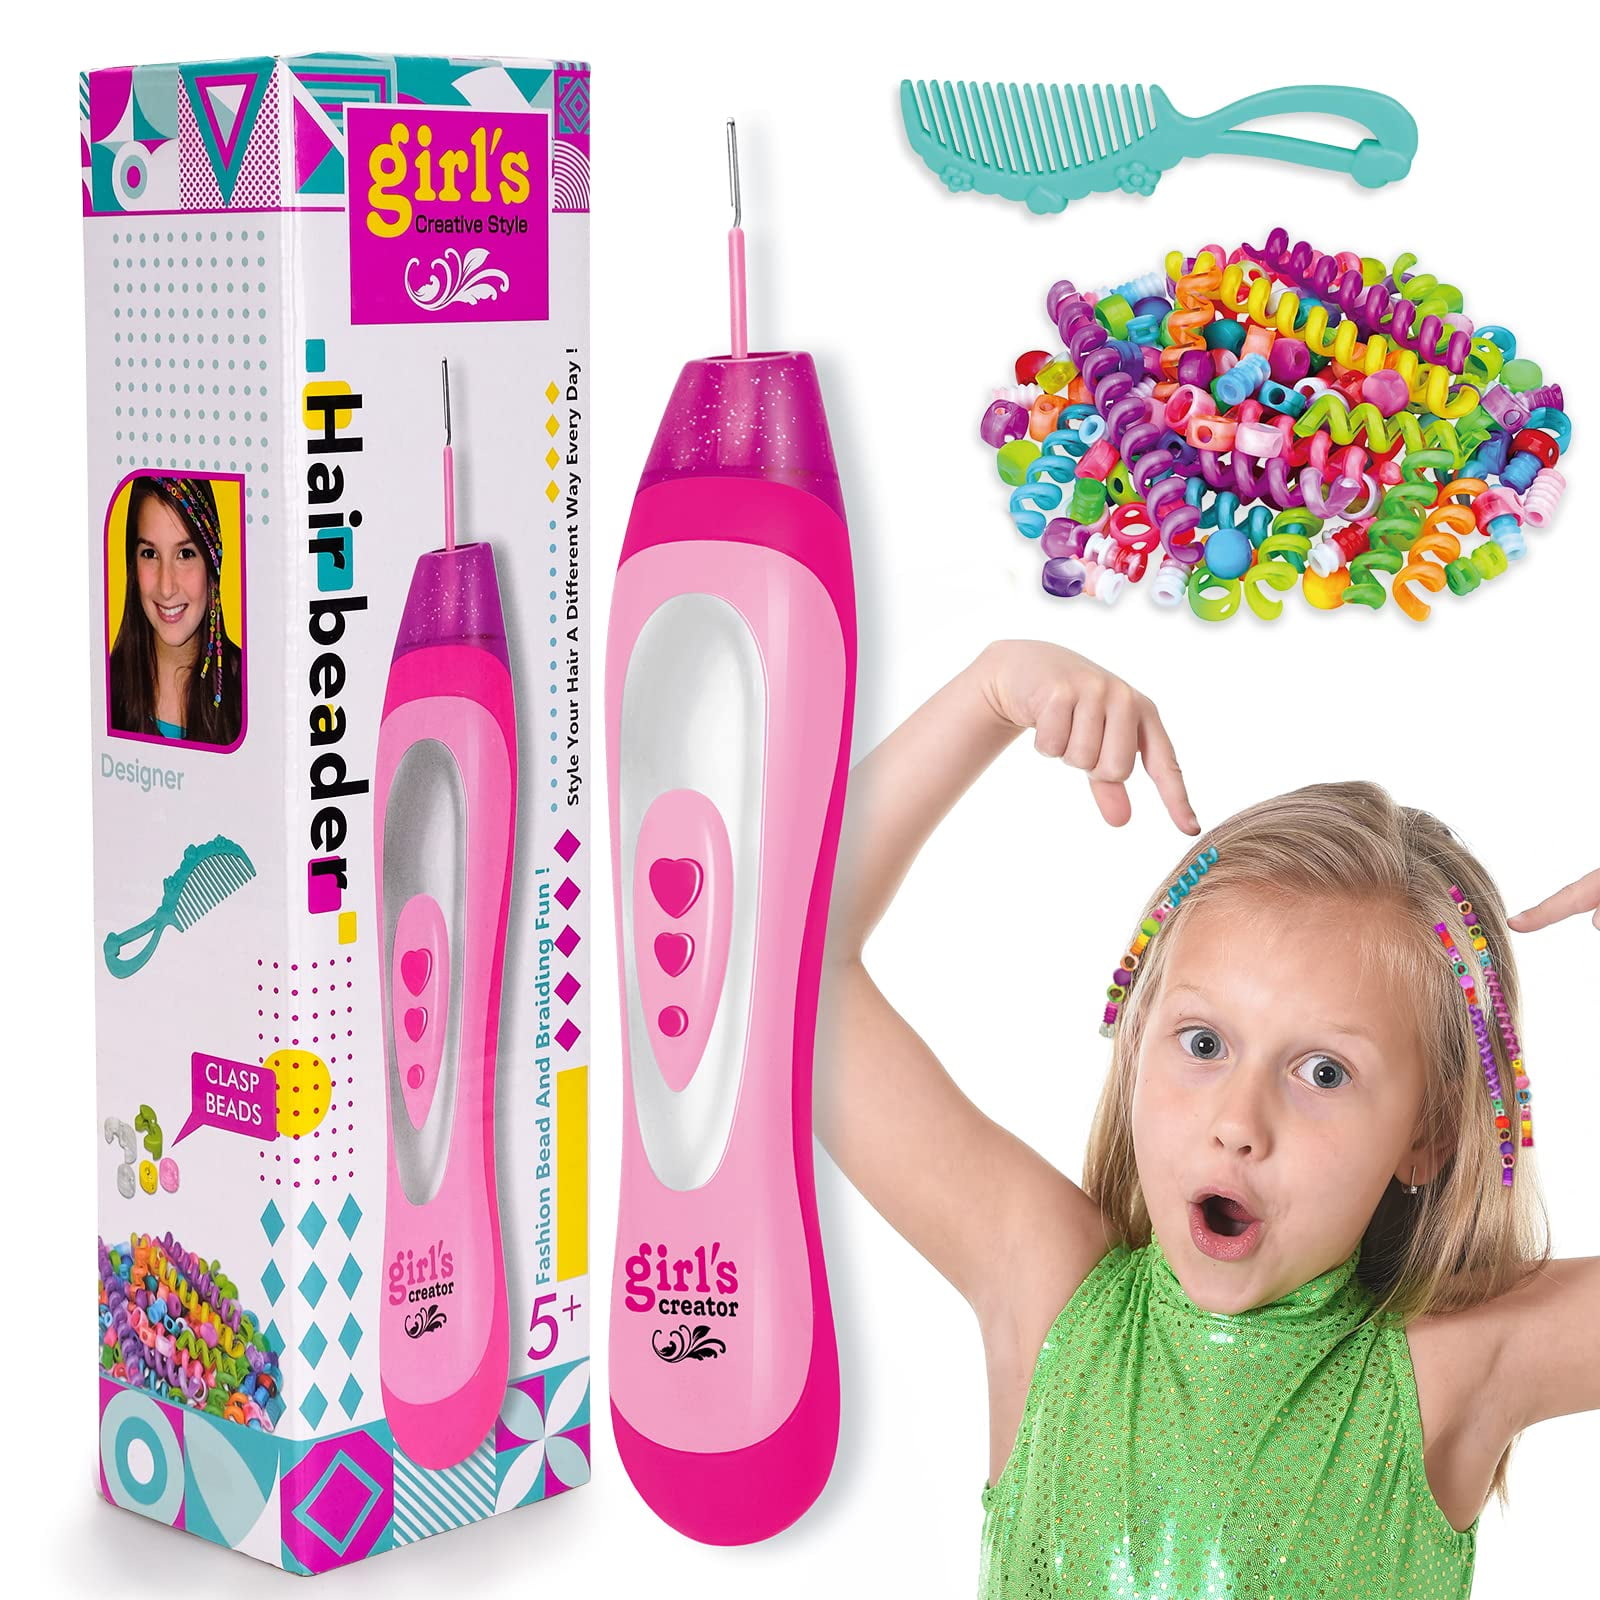 Dream Fun Hair Accessories Braider for 5 6 7 8 Year Old Girls, Jewellery  Kit Crystal Hair Beader Kits Toys for Kids Age 7 8 9 10 Beaded Hair  Braiding